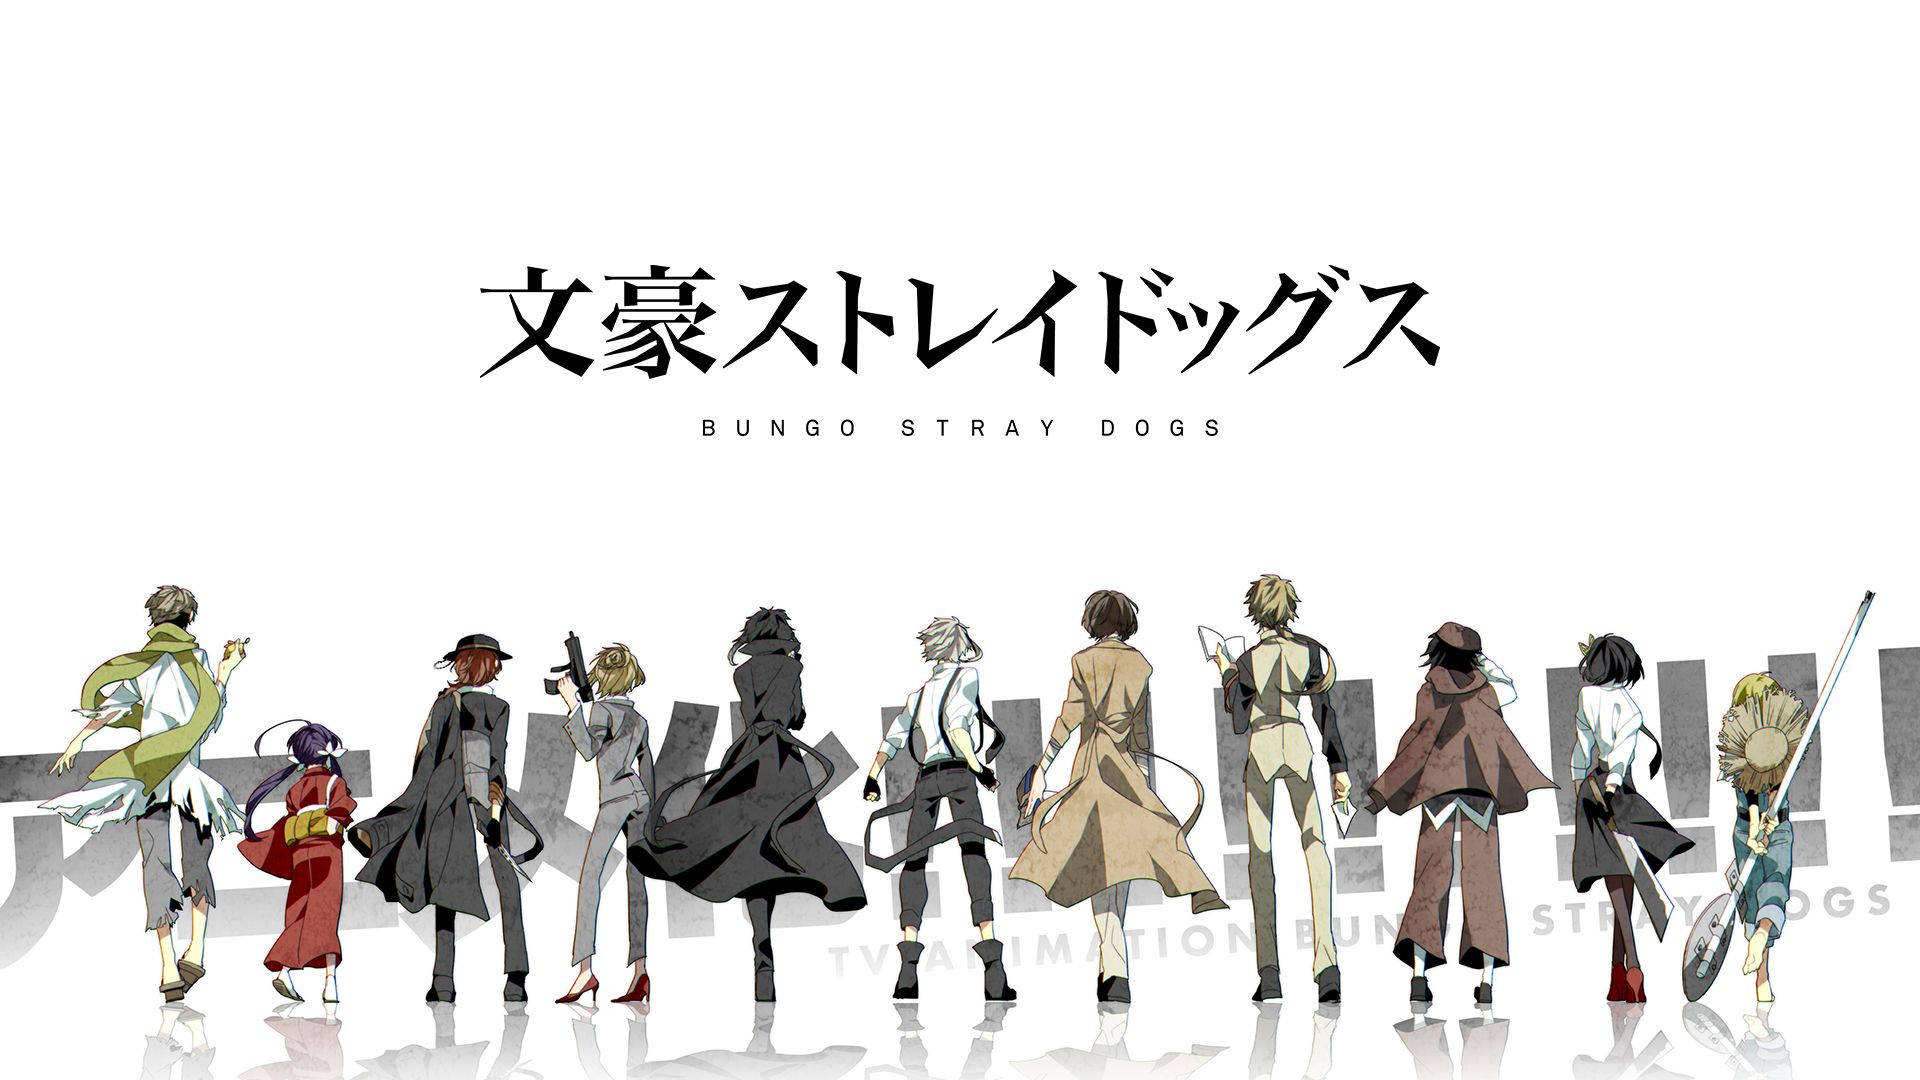 Bungo Stray Dogs Characters Back View Wallpaper